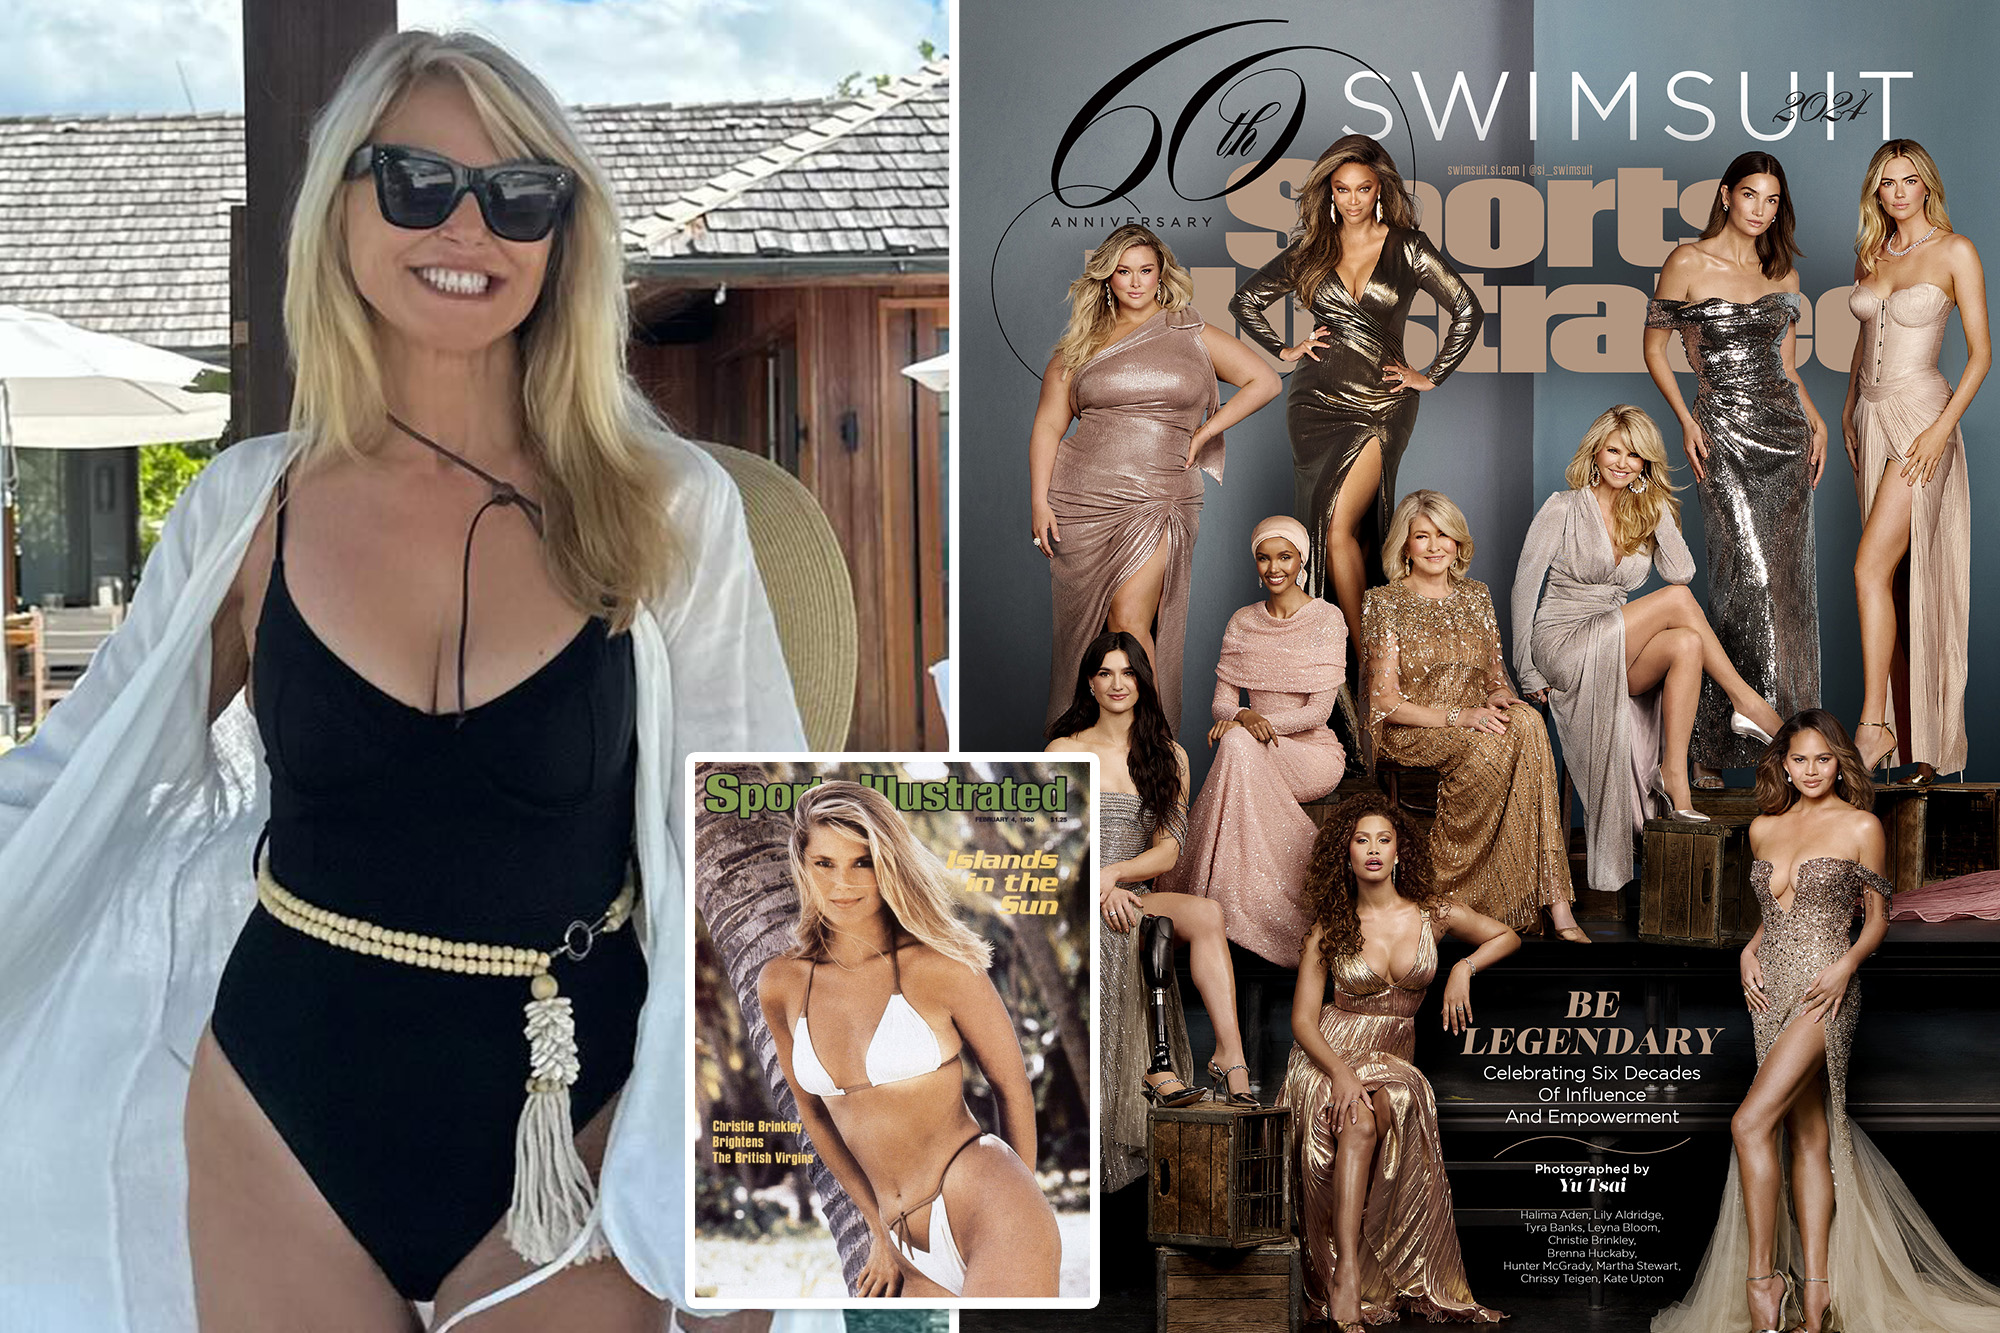 Christie Brinkley Reflects on Her Iconic Sports Illustrated Swimsuit Legacy